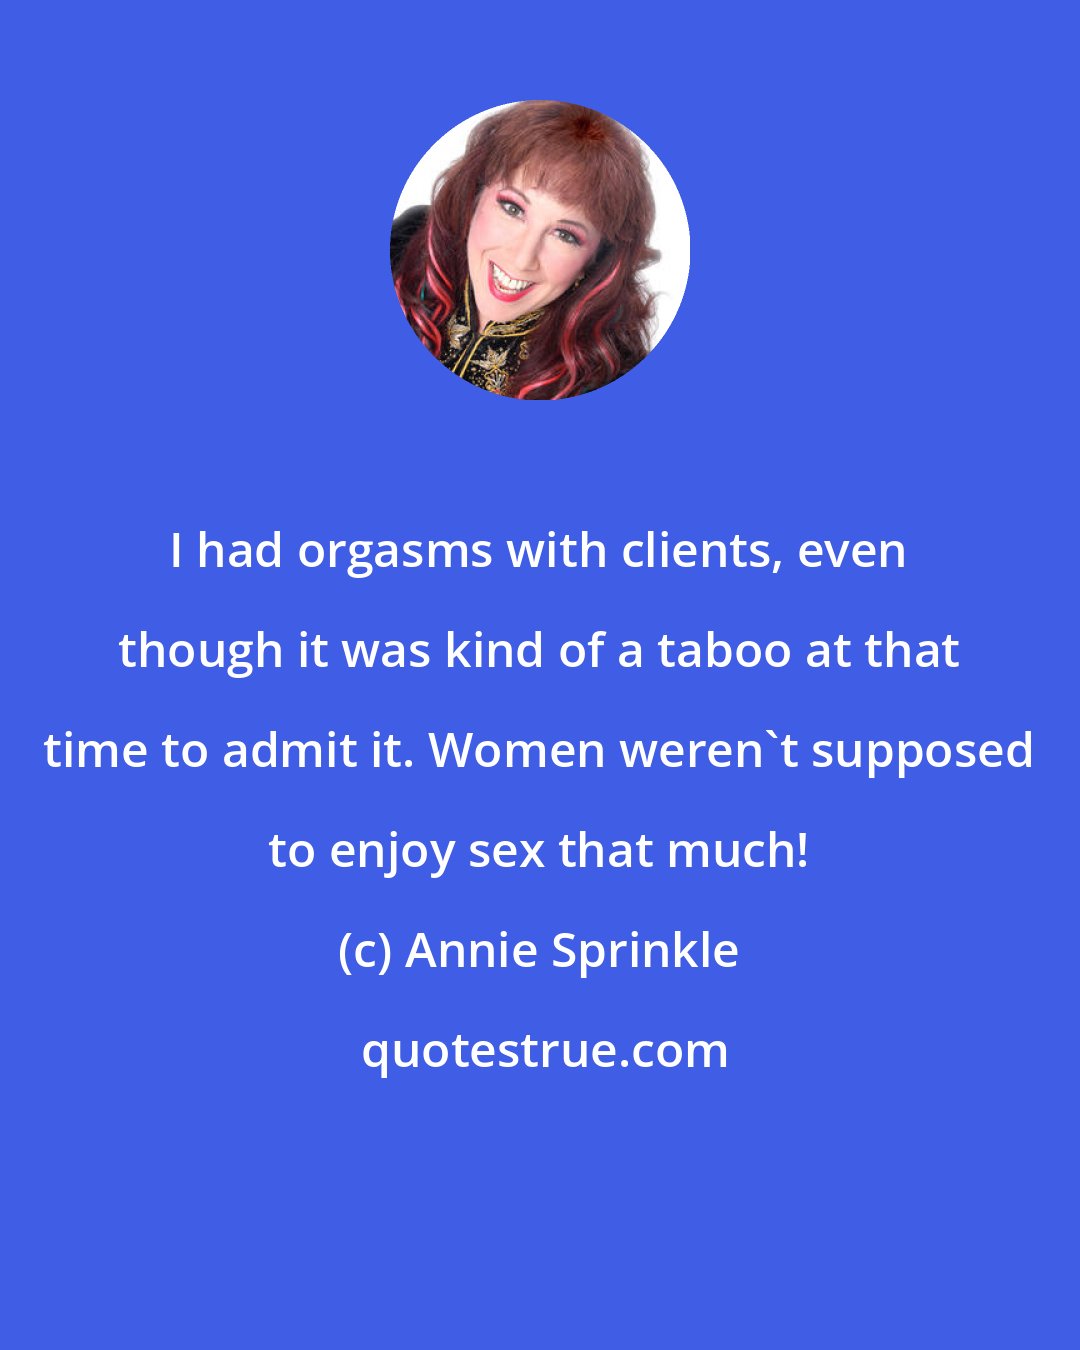 Annie Sprinkle: I had orgasms with clients, even though it was kind of a taboo at that time to admit it. Women weren't supposed to enjoy sex that much!